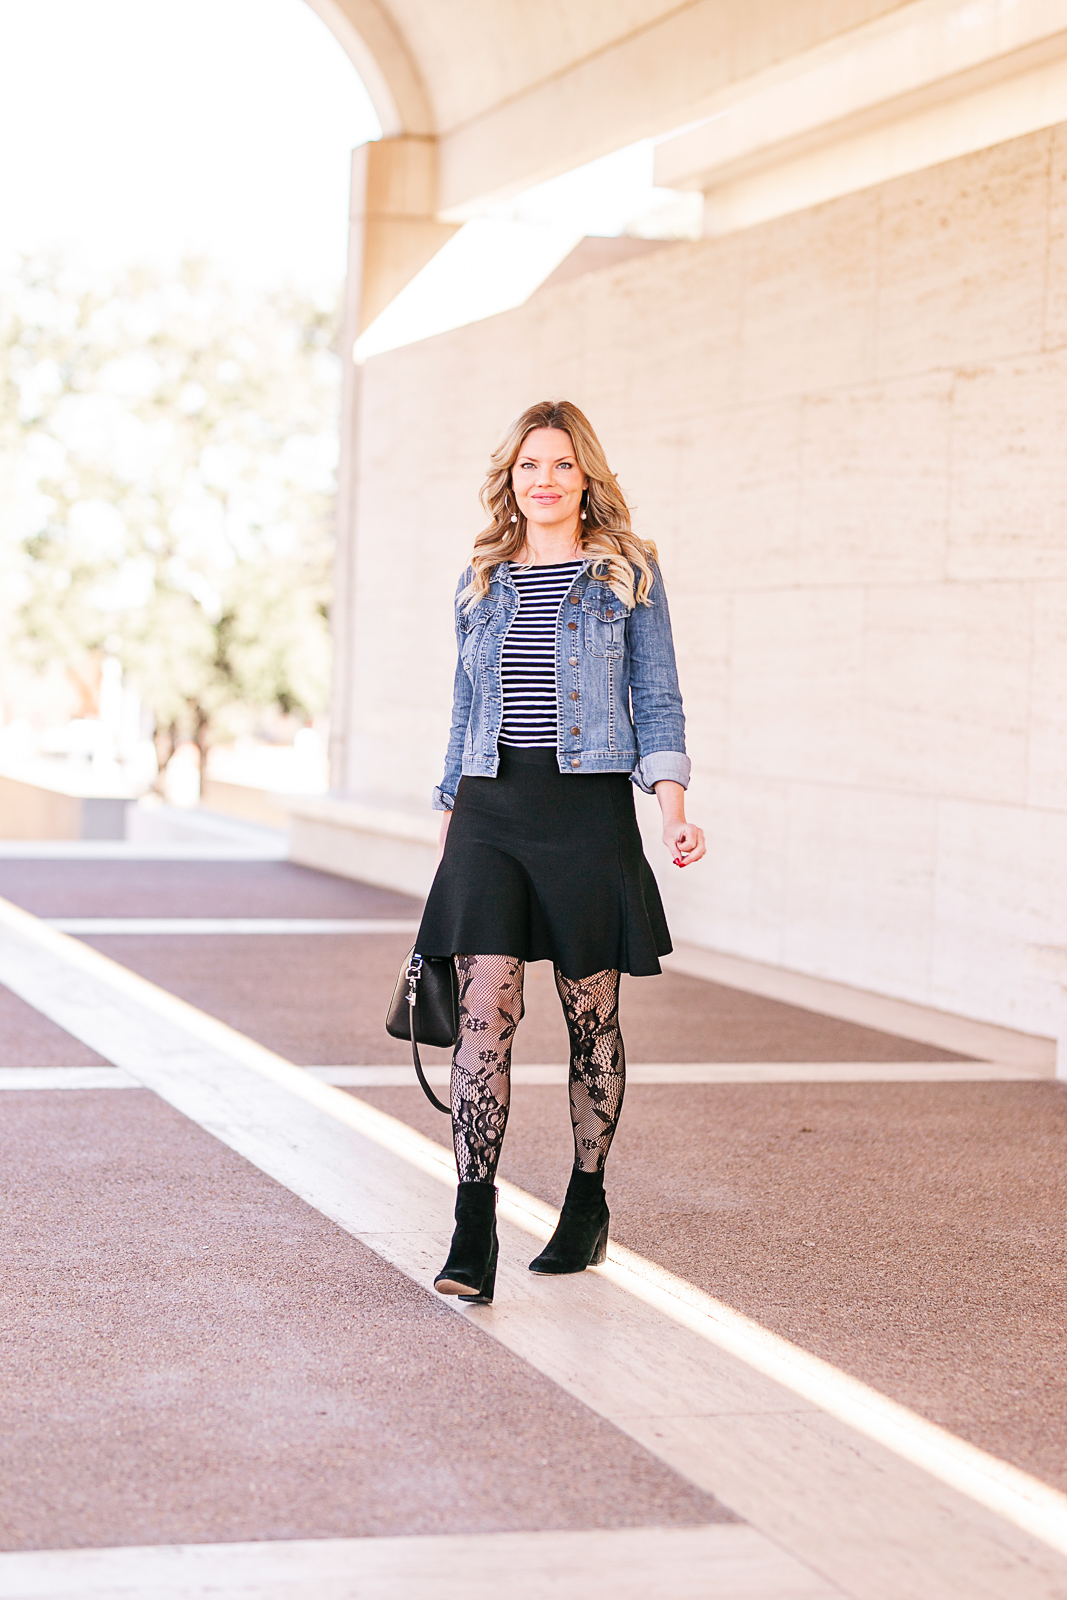 How to style patterned Tights: Styling Tips by RetroCat